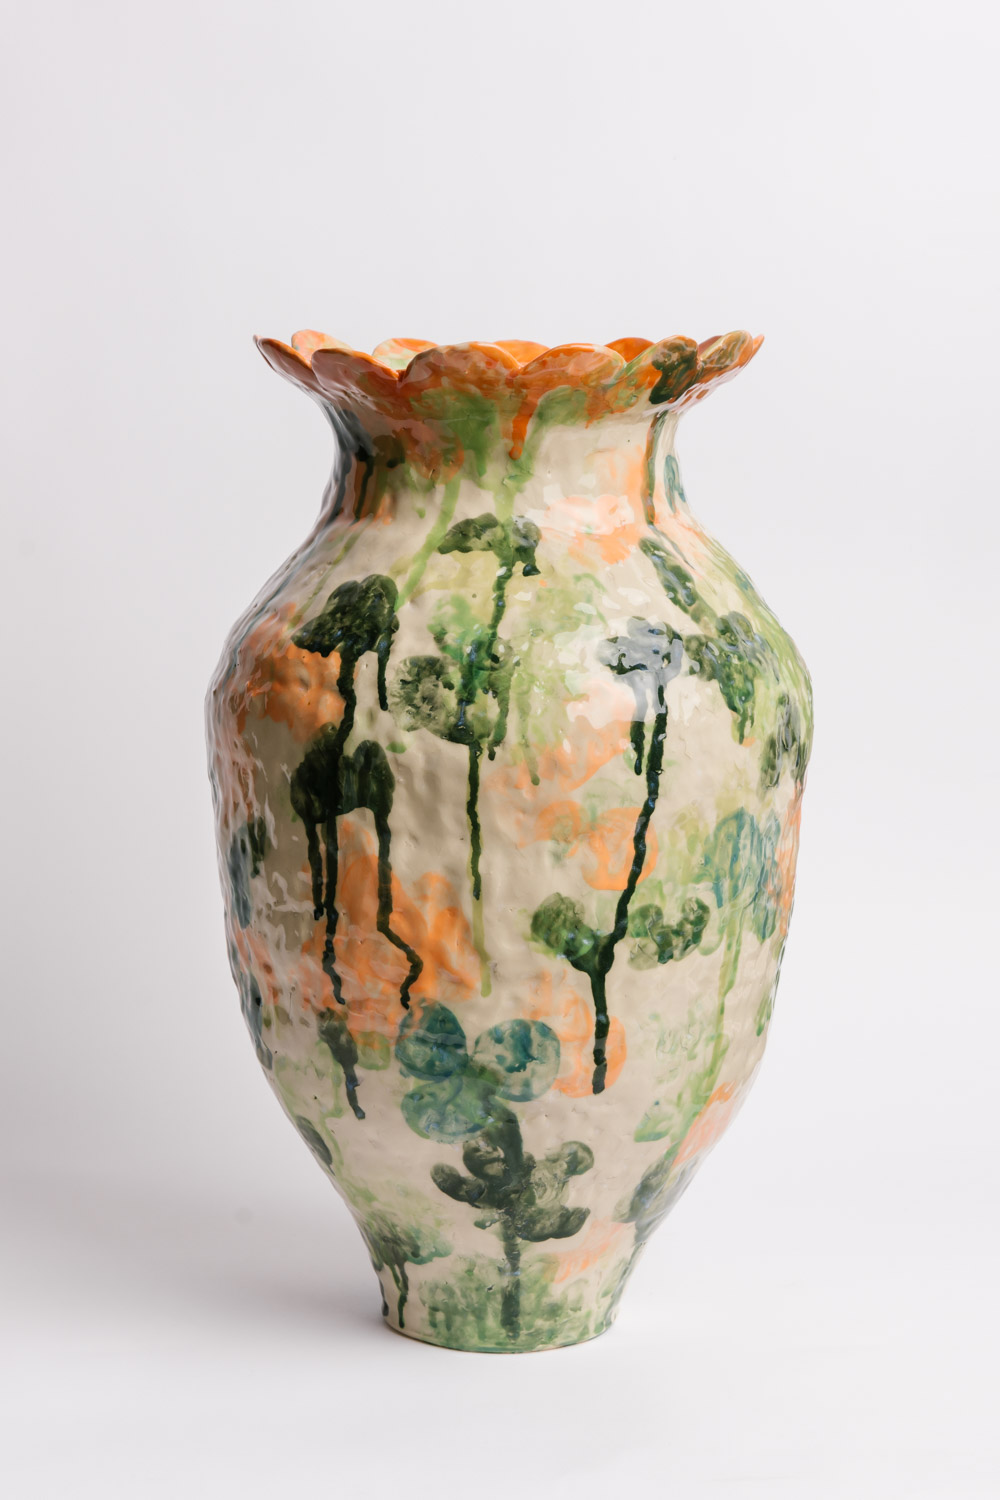 Large hand built ceramic vessel with painterly details in orange and greens, by Susan Buret, photo by Samee Lapham